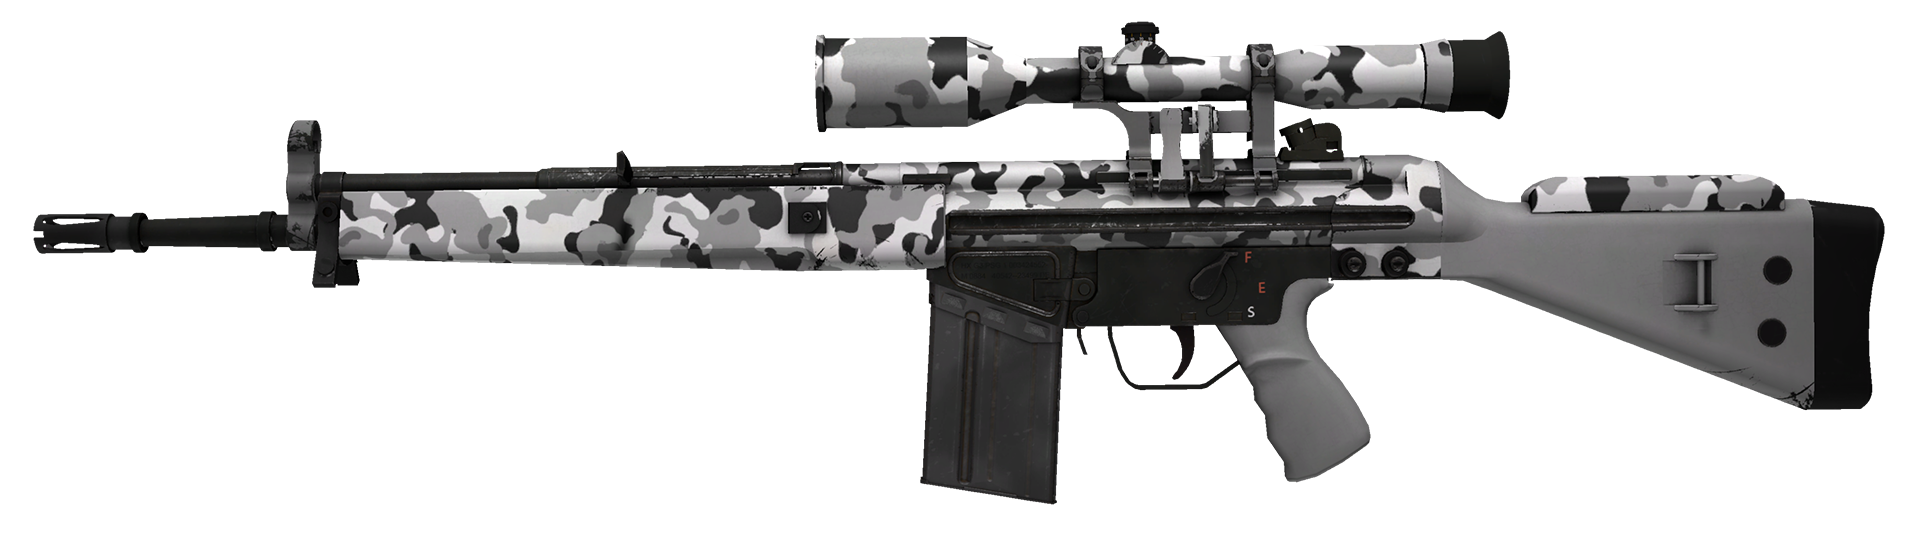 G3SG1 Black Sand cs go skin download the last version for iphone